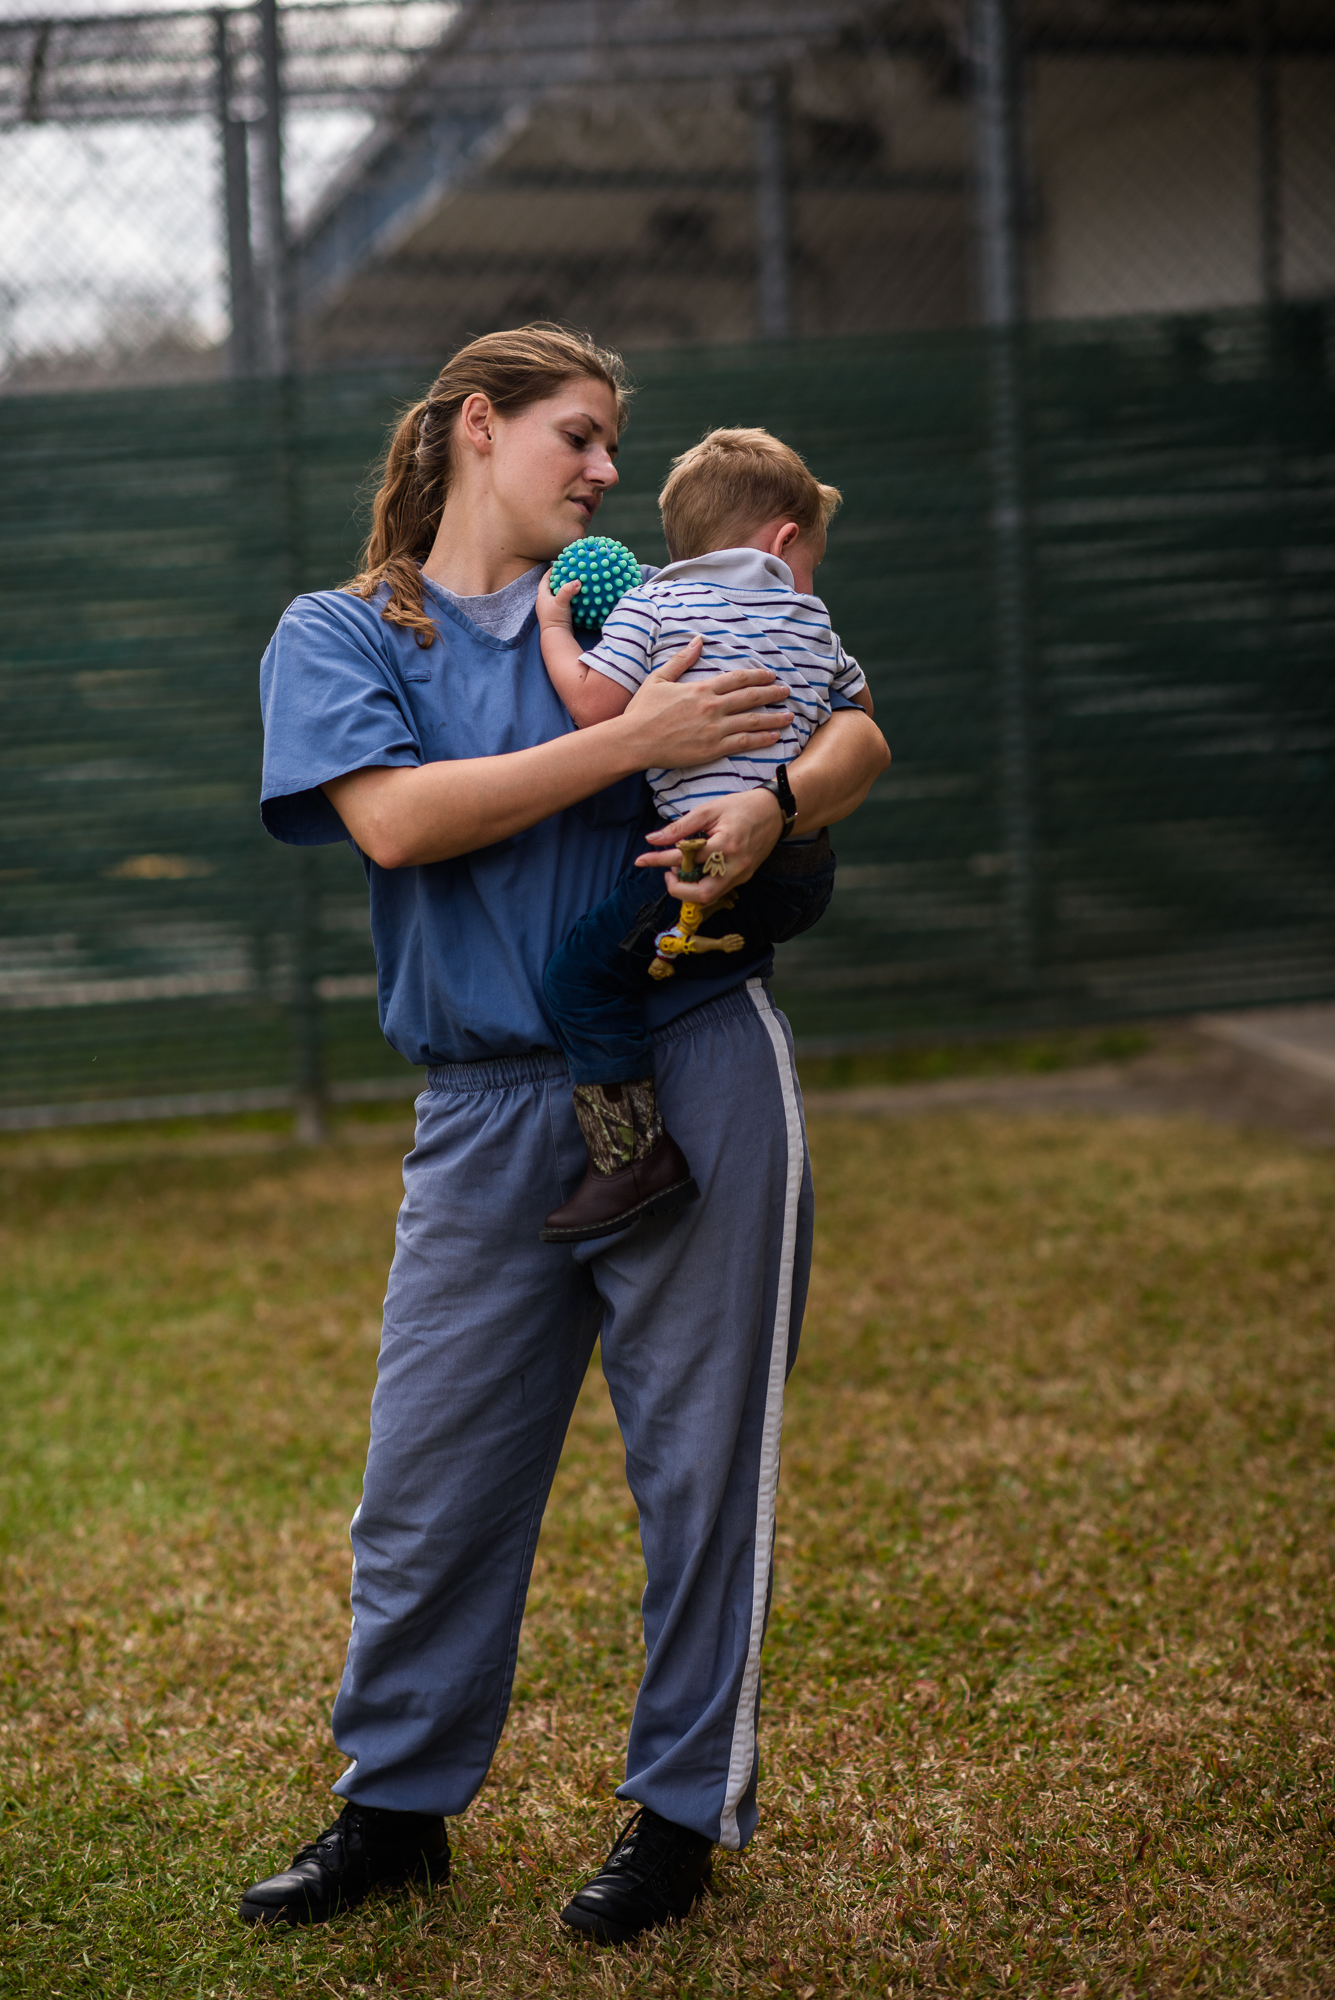  Jessie, age 23, holds her son, age 2, during a bonding visit at the Lowell Correctional Institution in Ocala, Florida. Jessie is incarcerated for 4 years for bringing controlled substances to her boyfriend during a prison visit. “Sometimes you just 